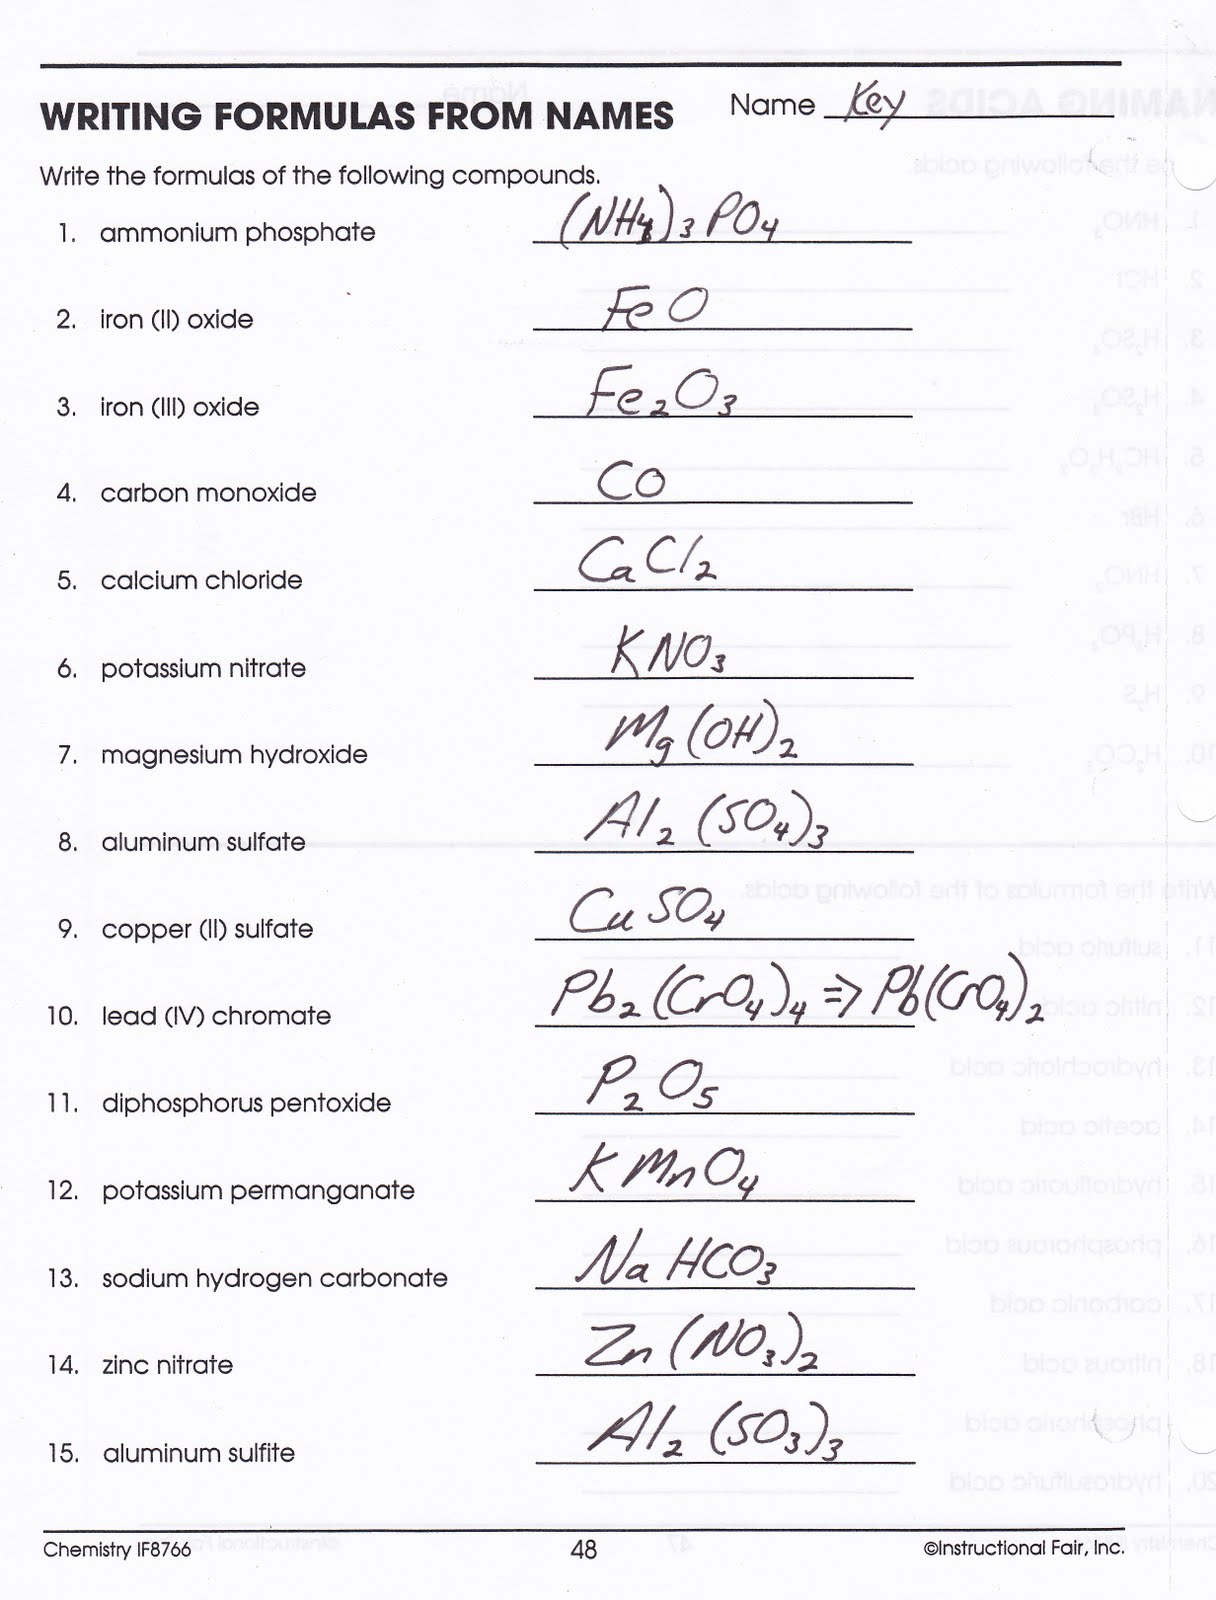 Heritage High School Chemistry 2010 11 Writing Compound Names And Formulas Key